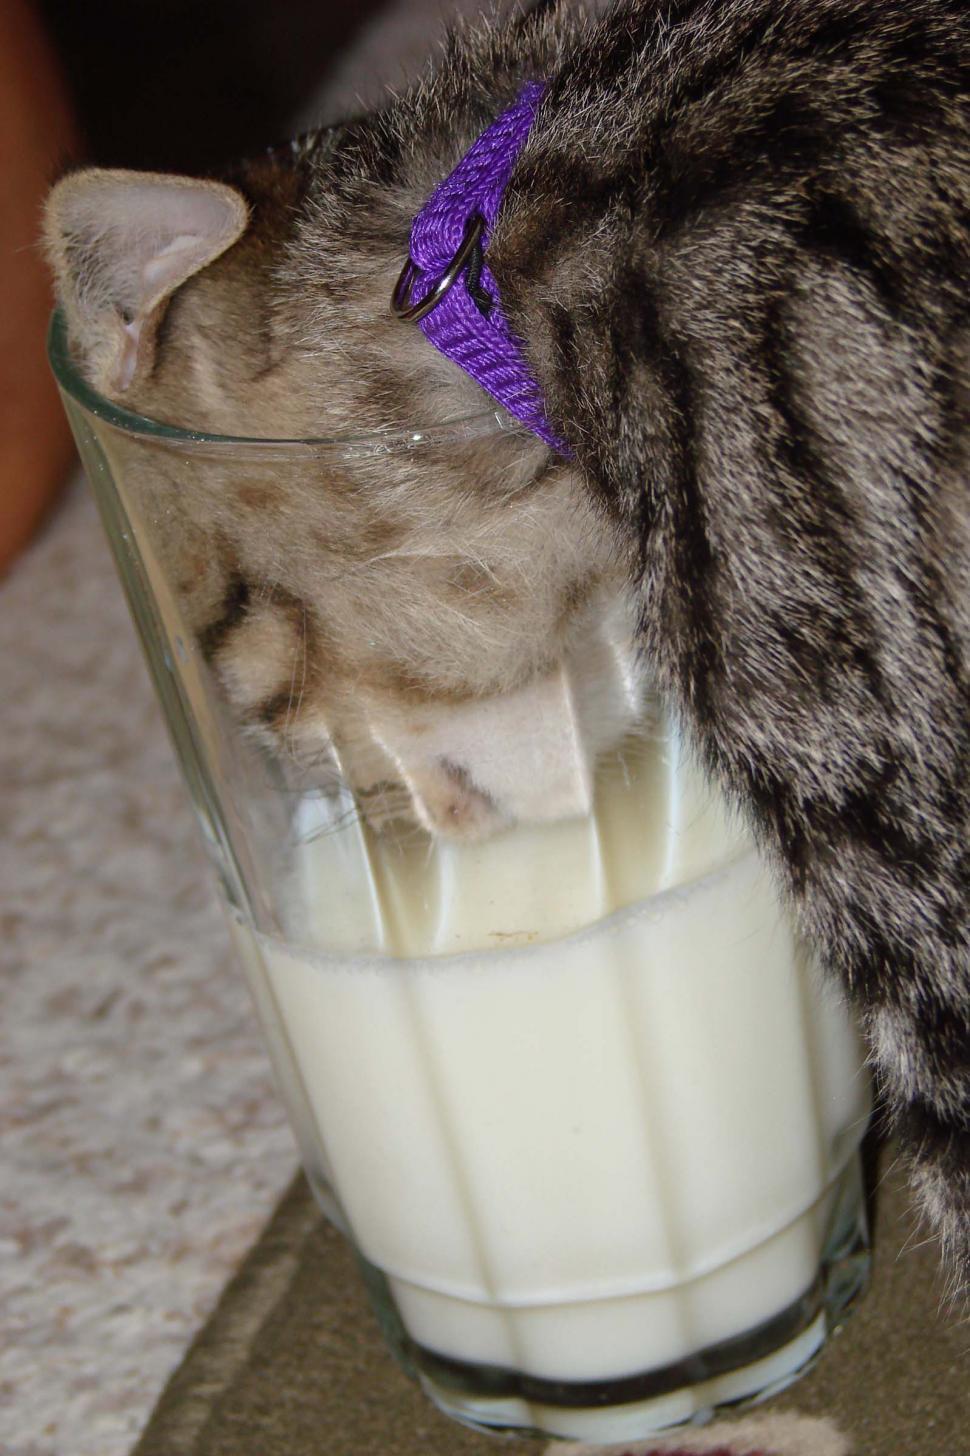 Free Image of Cat Drinking Milk From Glass 